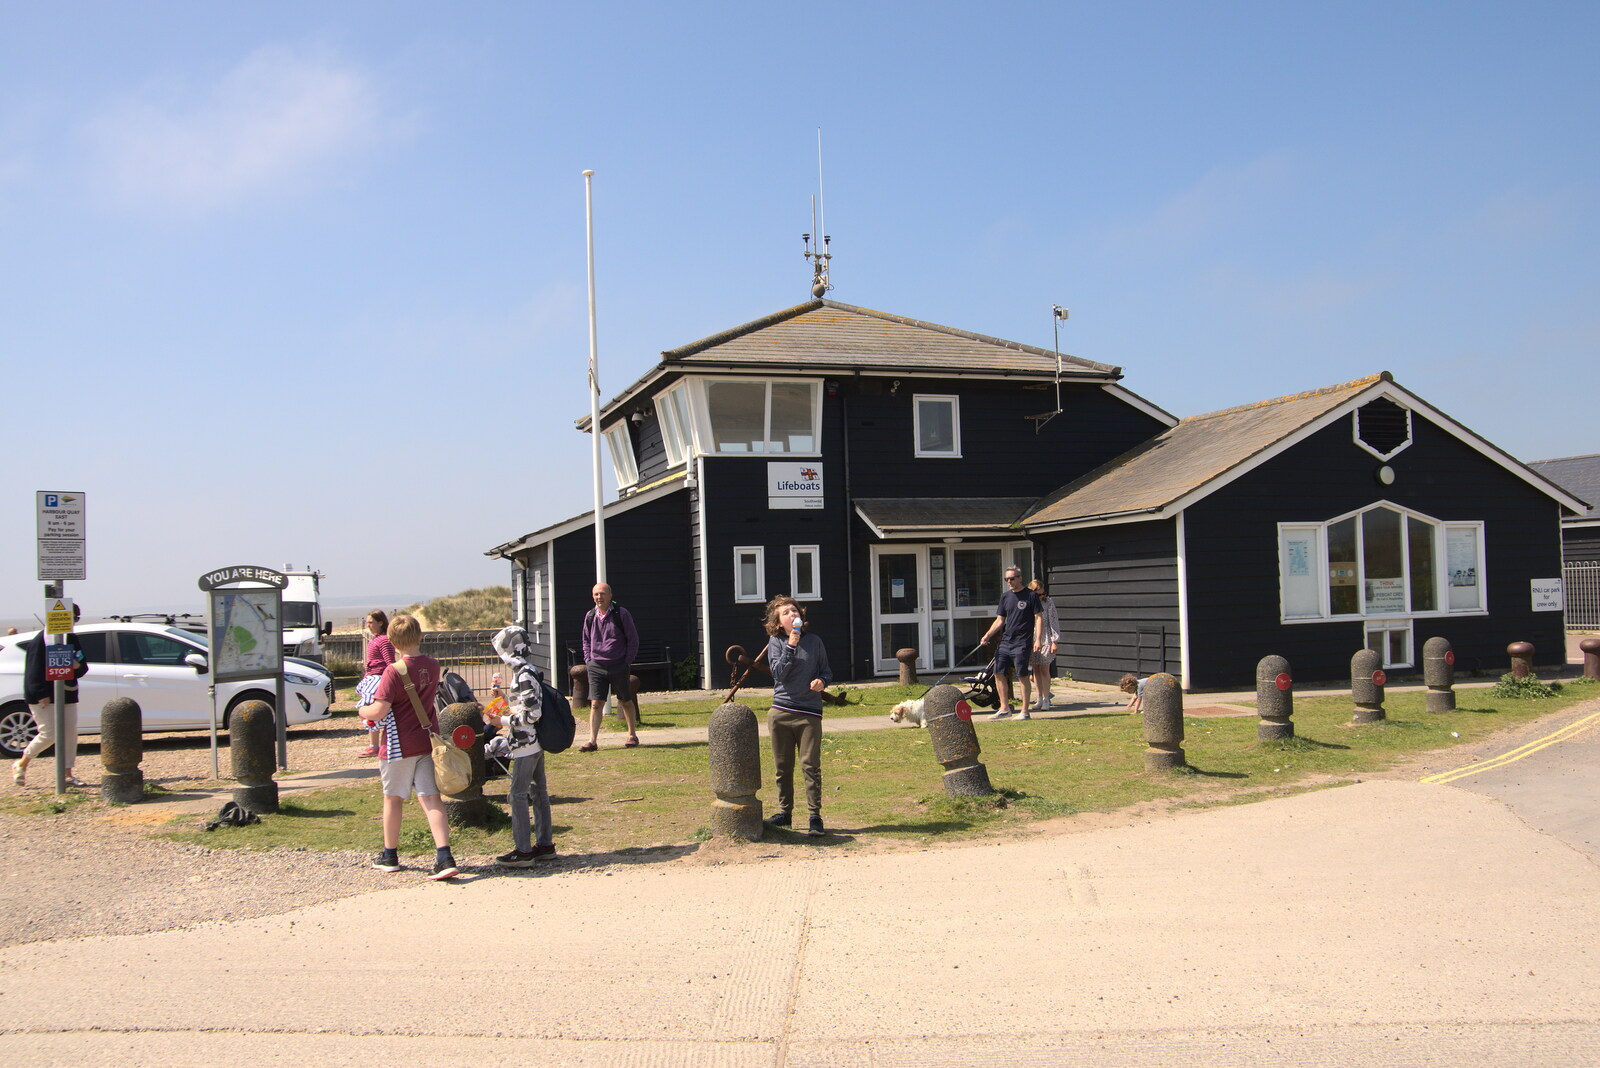 The RNLI station at Southwold from A Day at the Beach with Sis, Southwold, Suffolk - 31st May 2021